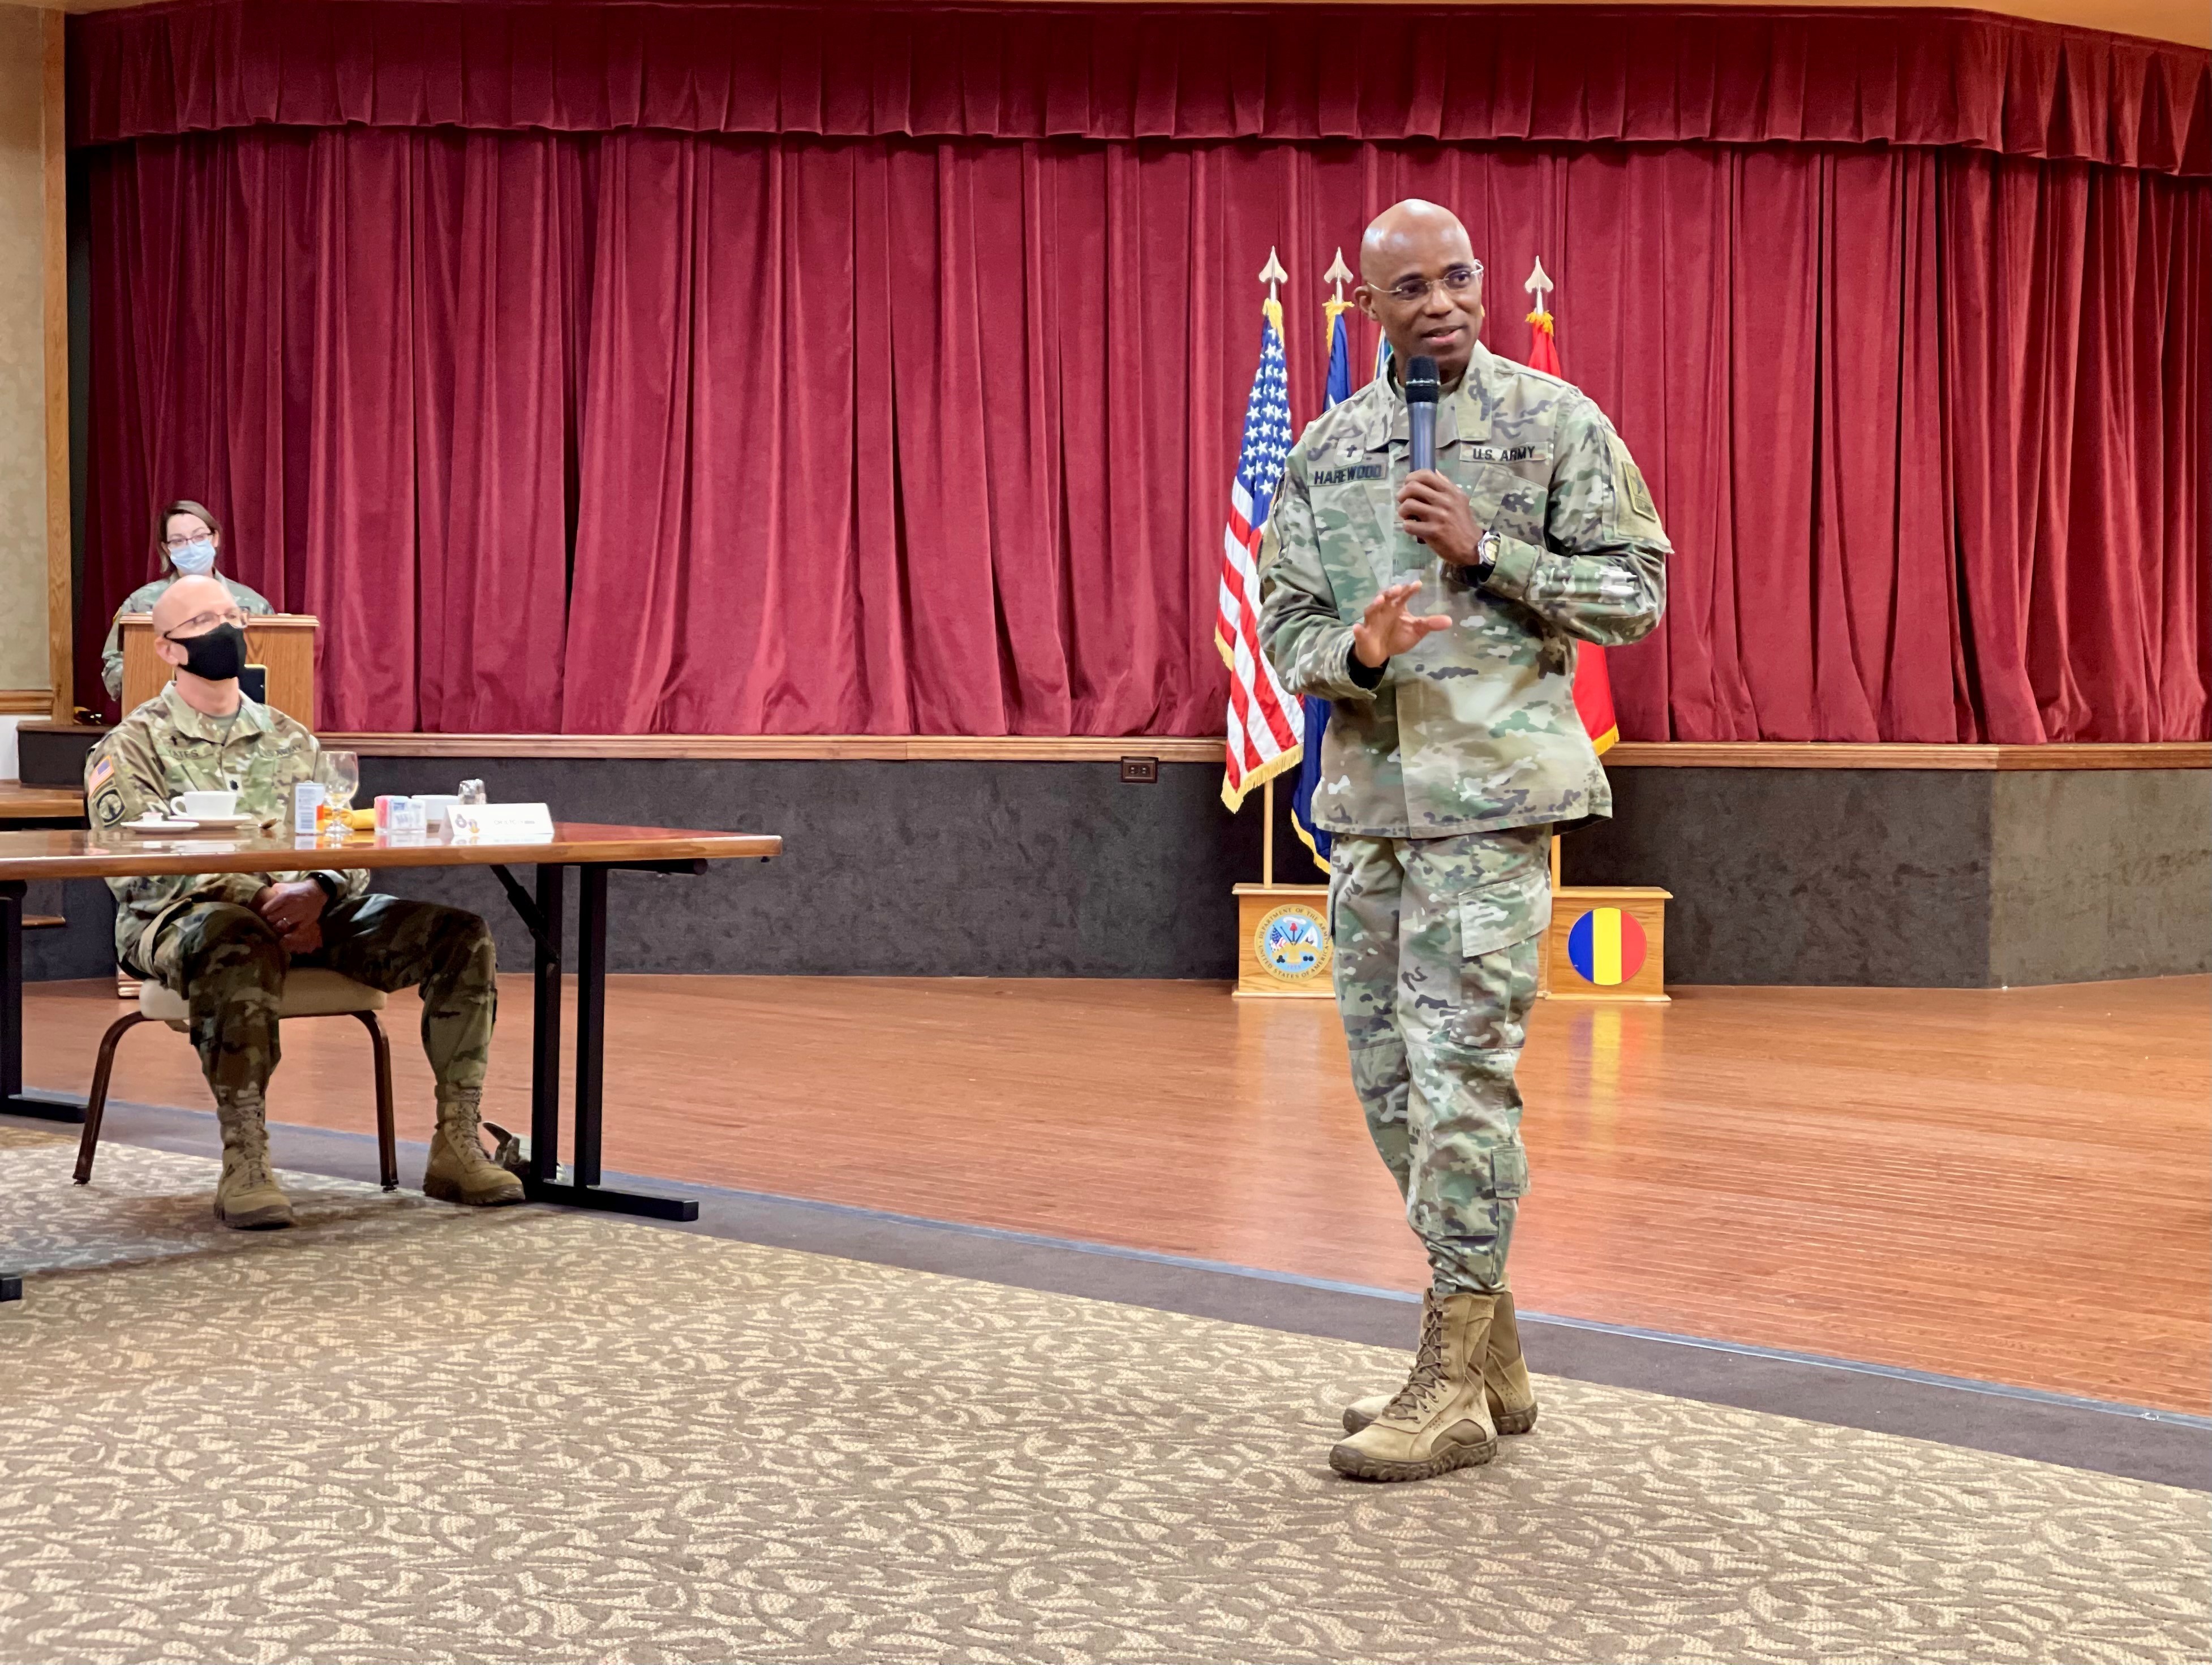 New DLA chaplain to focus on community connections > Defense